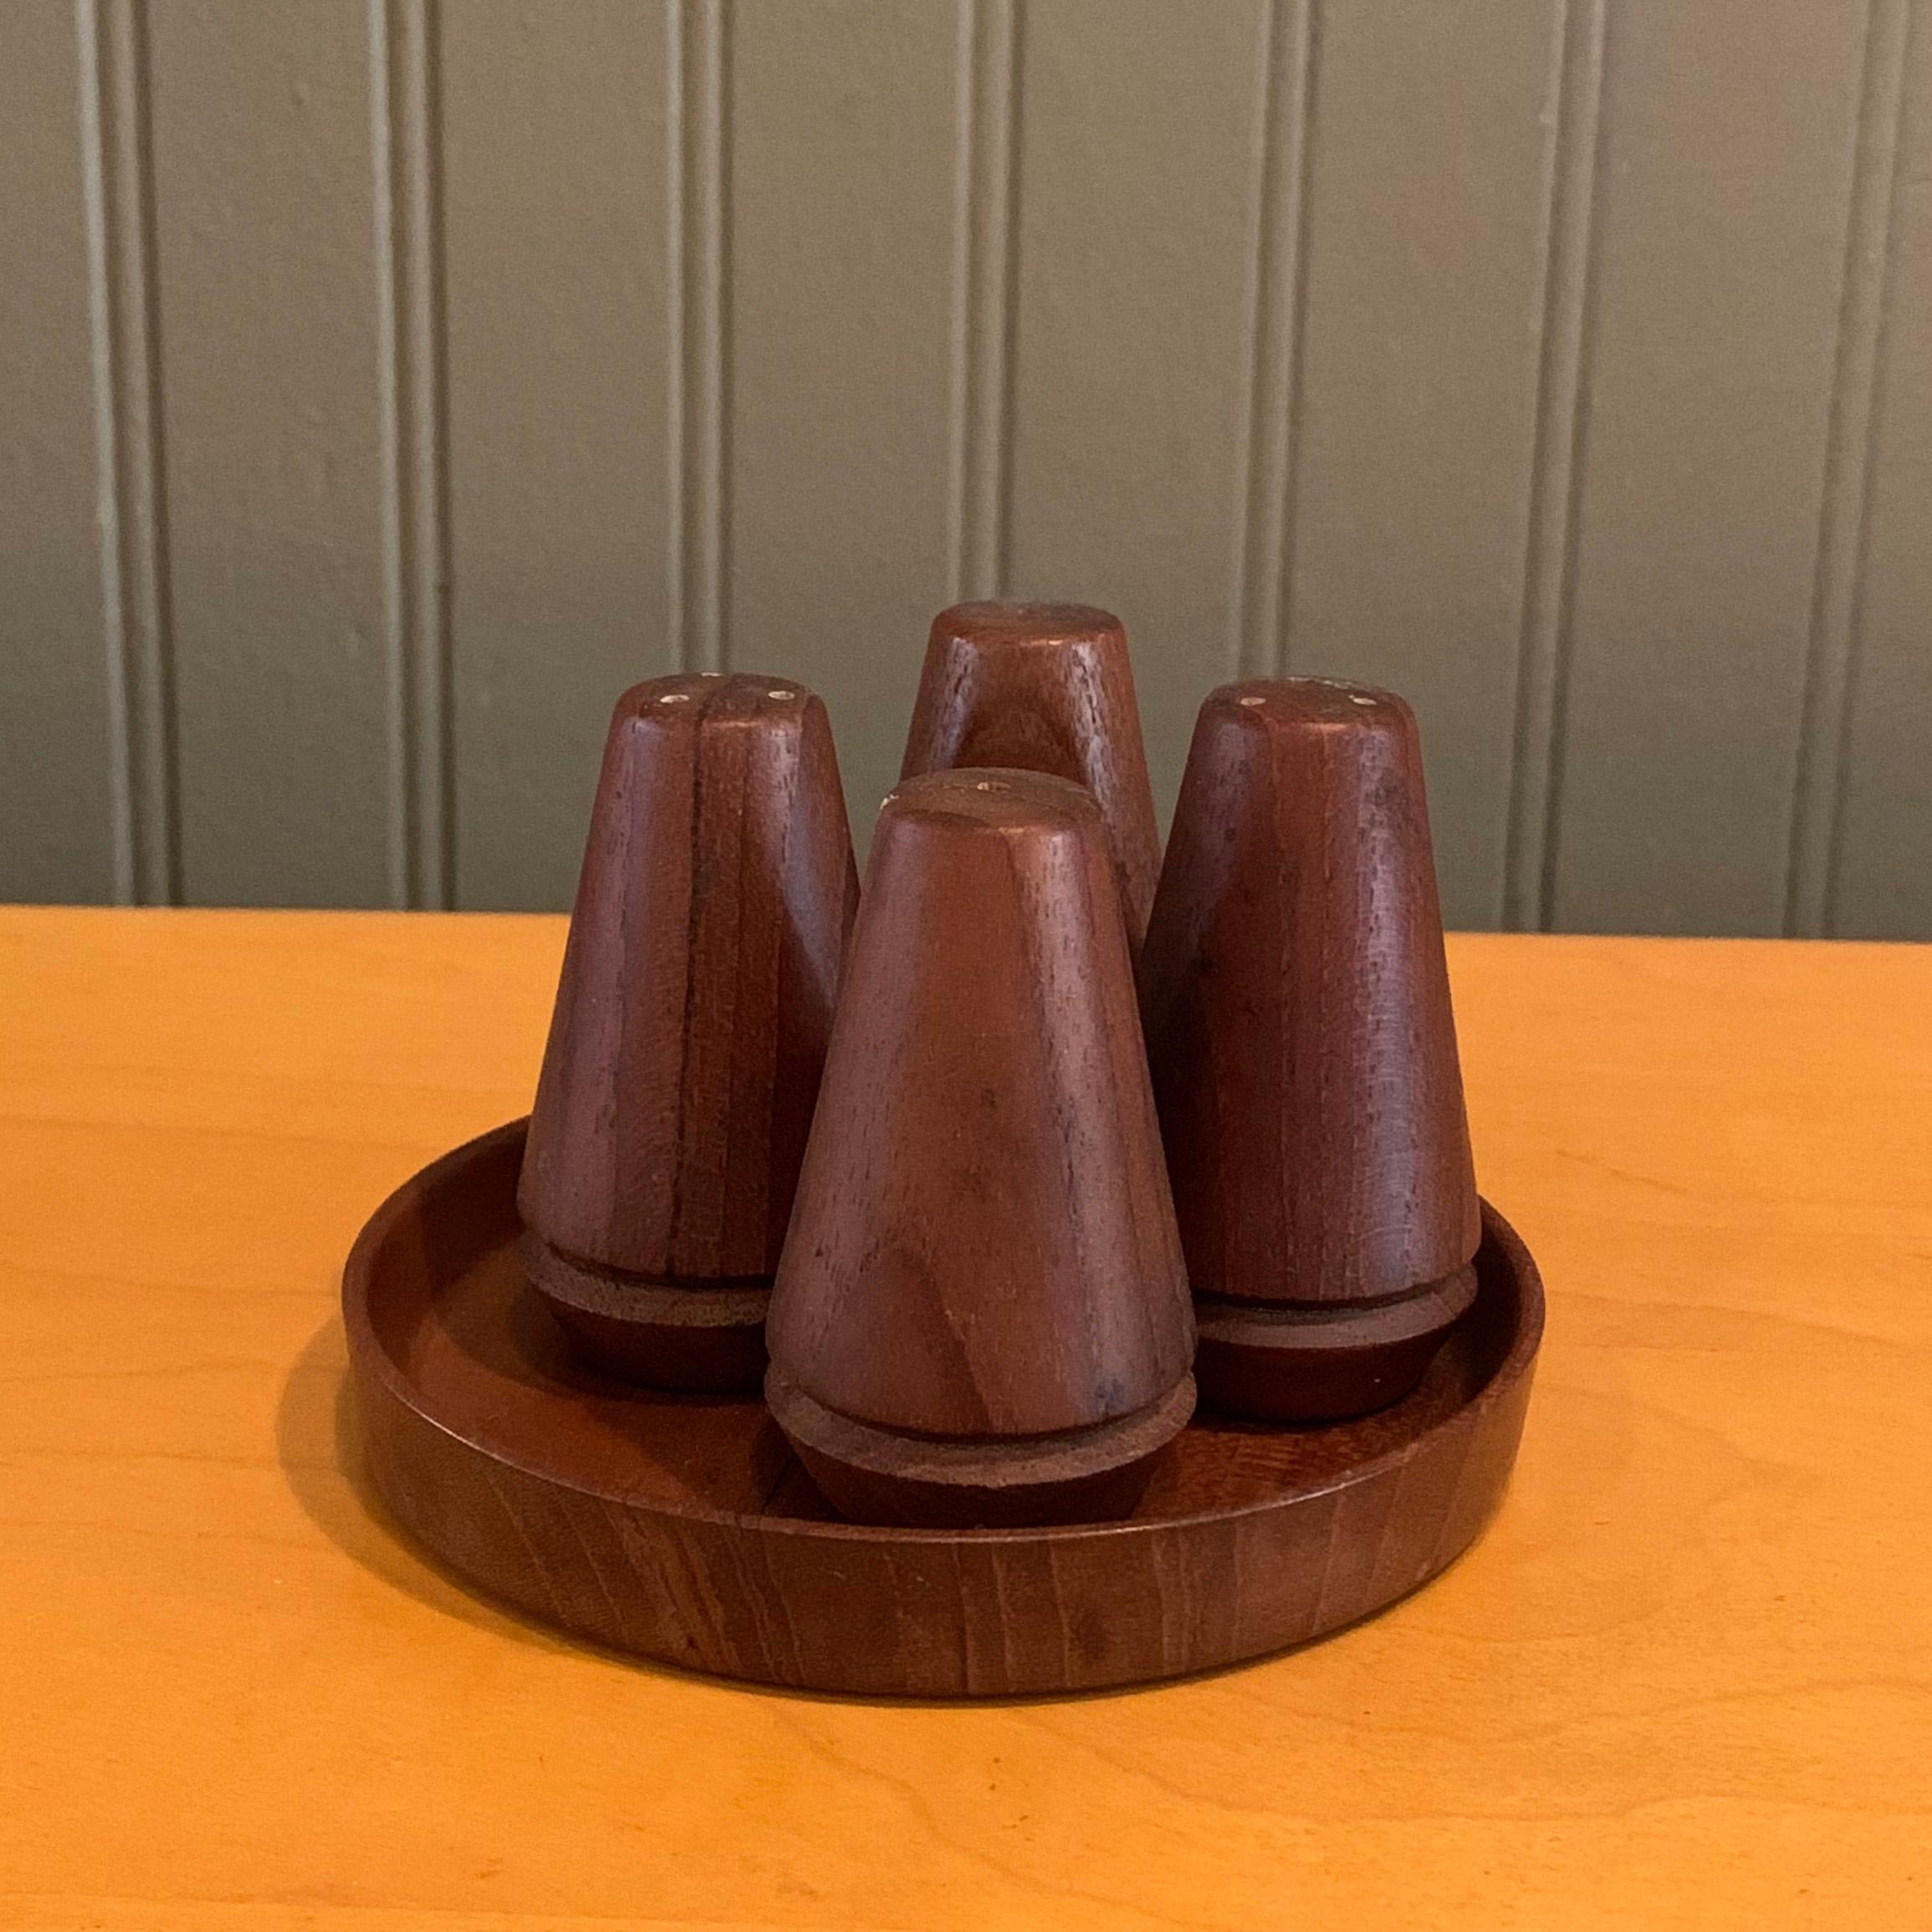 Danish modern, teak, salt and pepper shakers set by Ludvig Pontoppidan features 2 sets of shakers in a round holding tray.